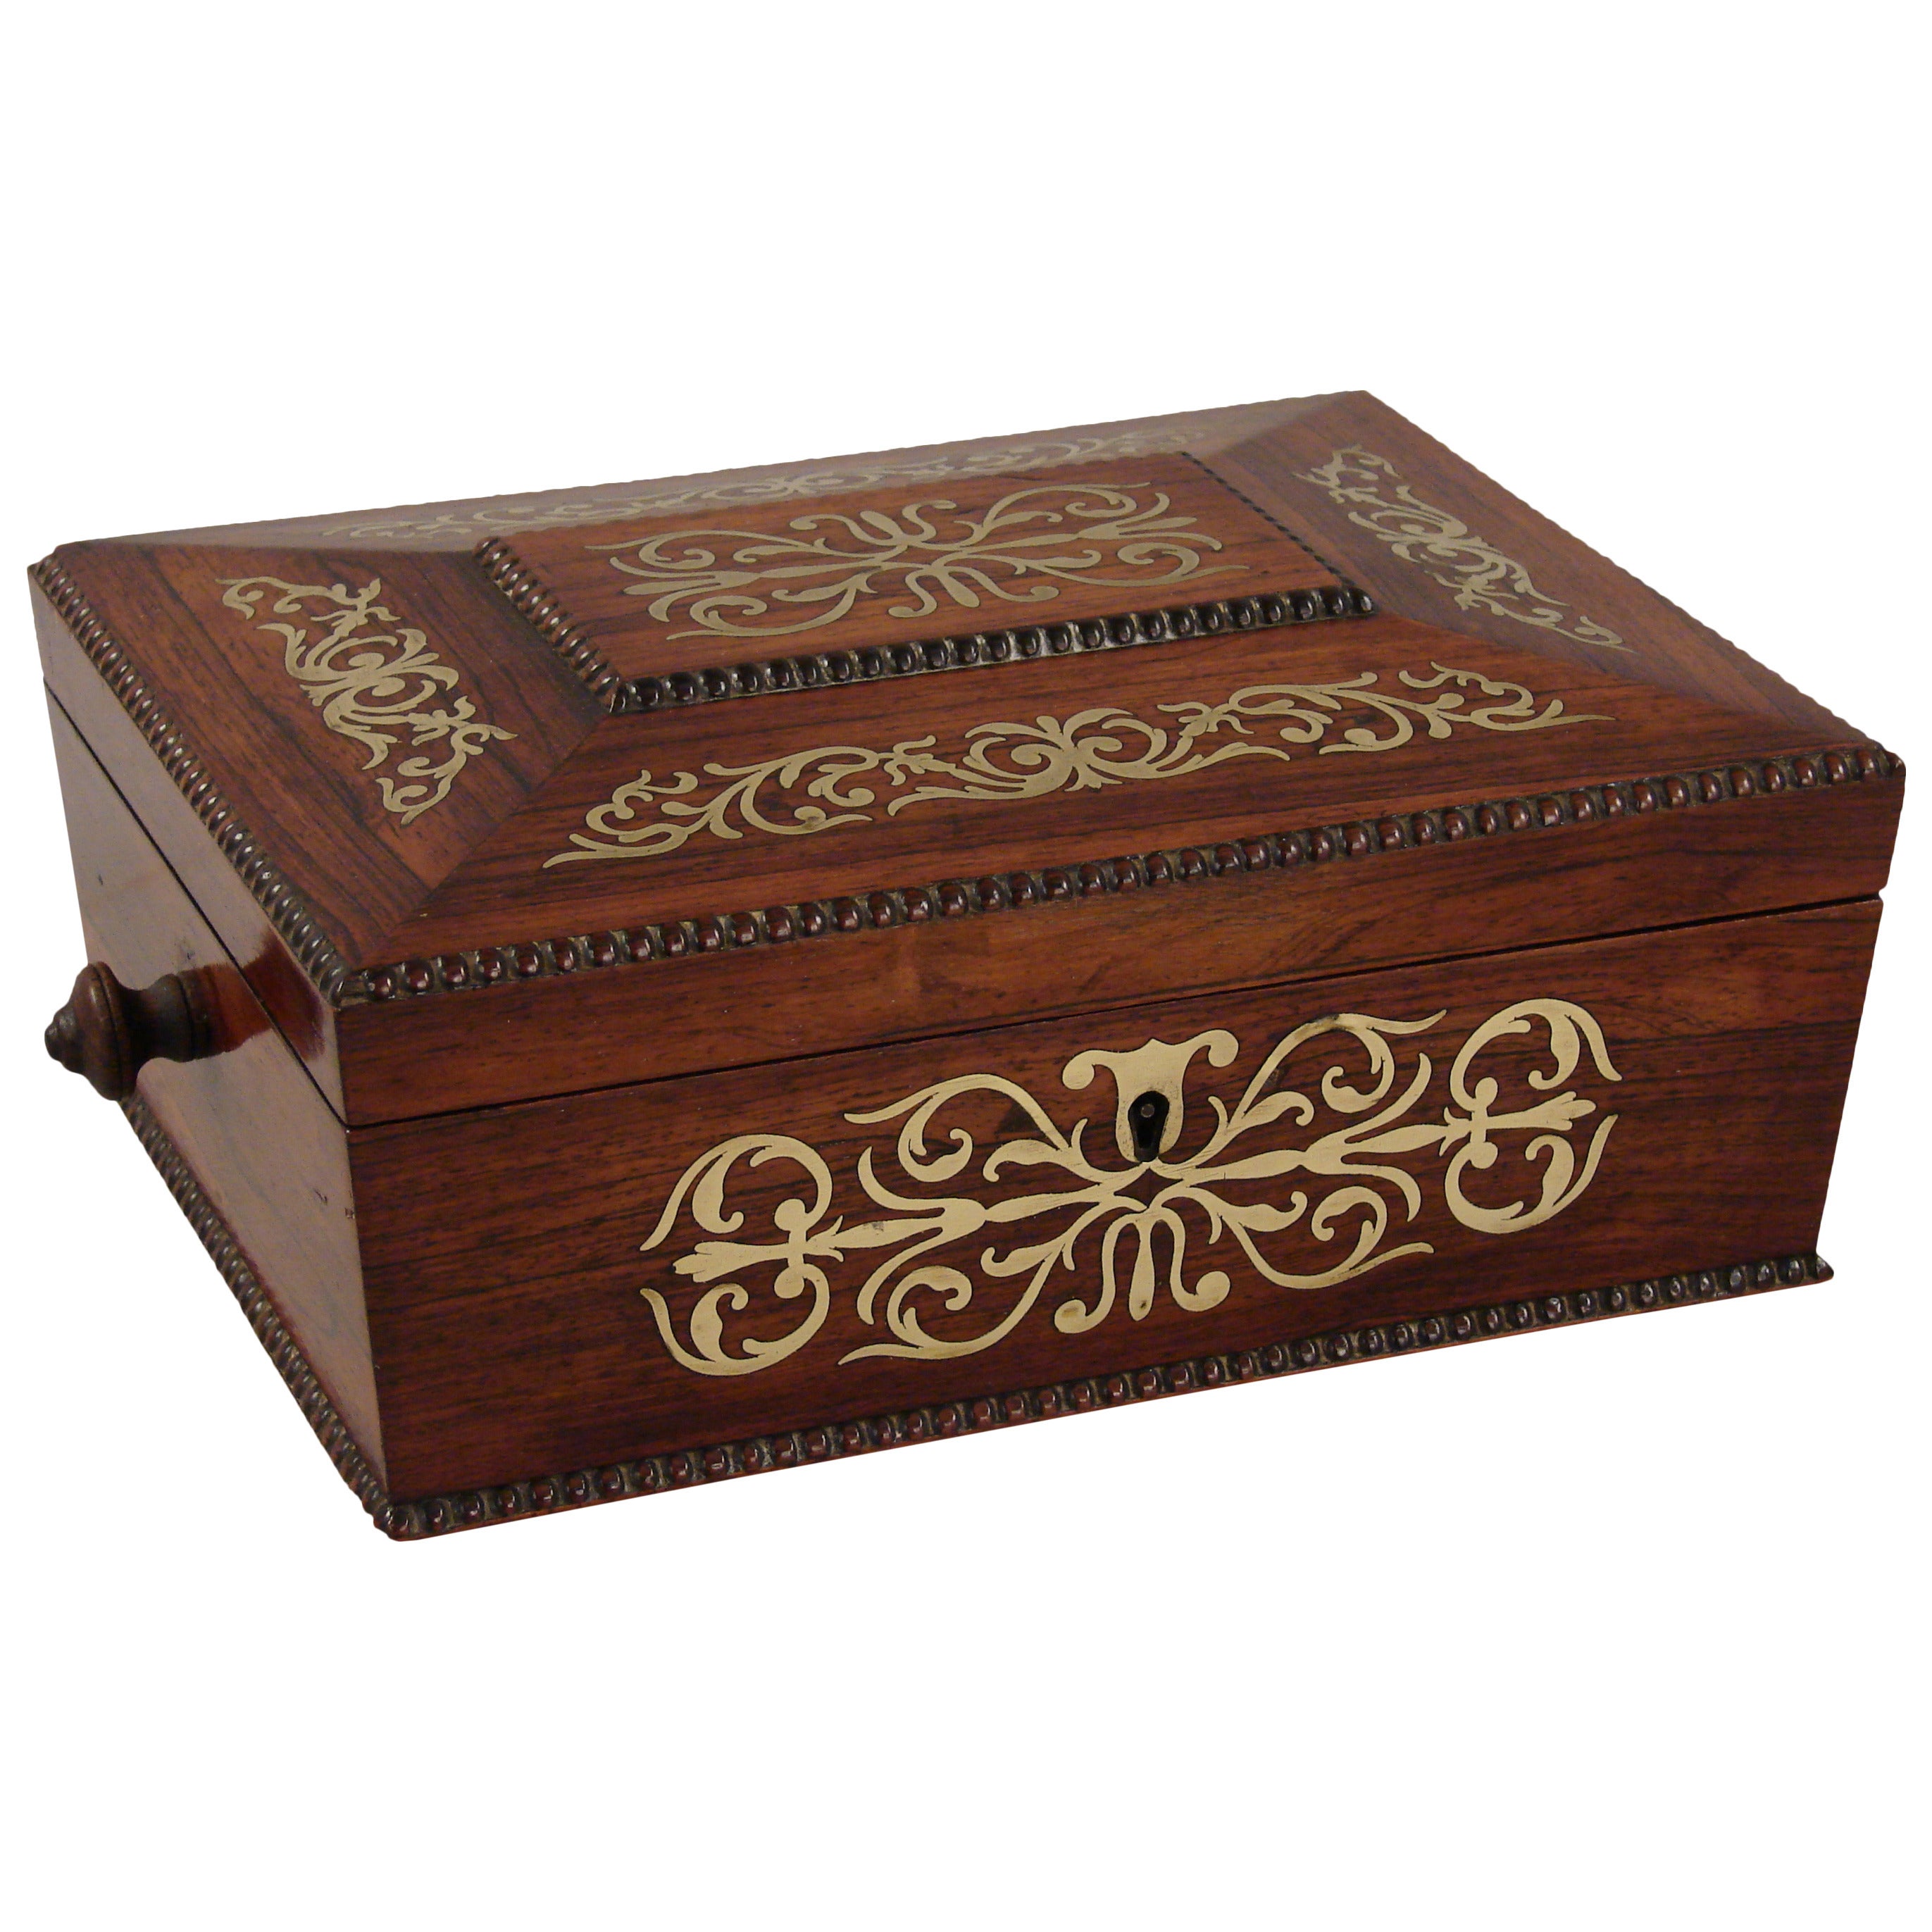 Late Regency Rosewood Brass Inlaid Sewing Box